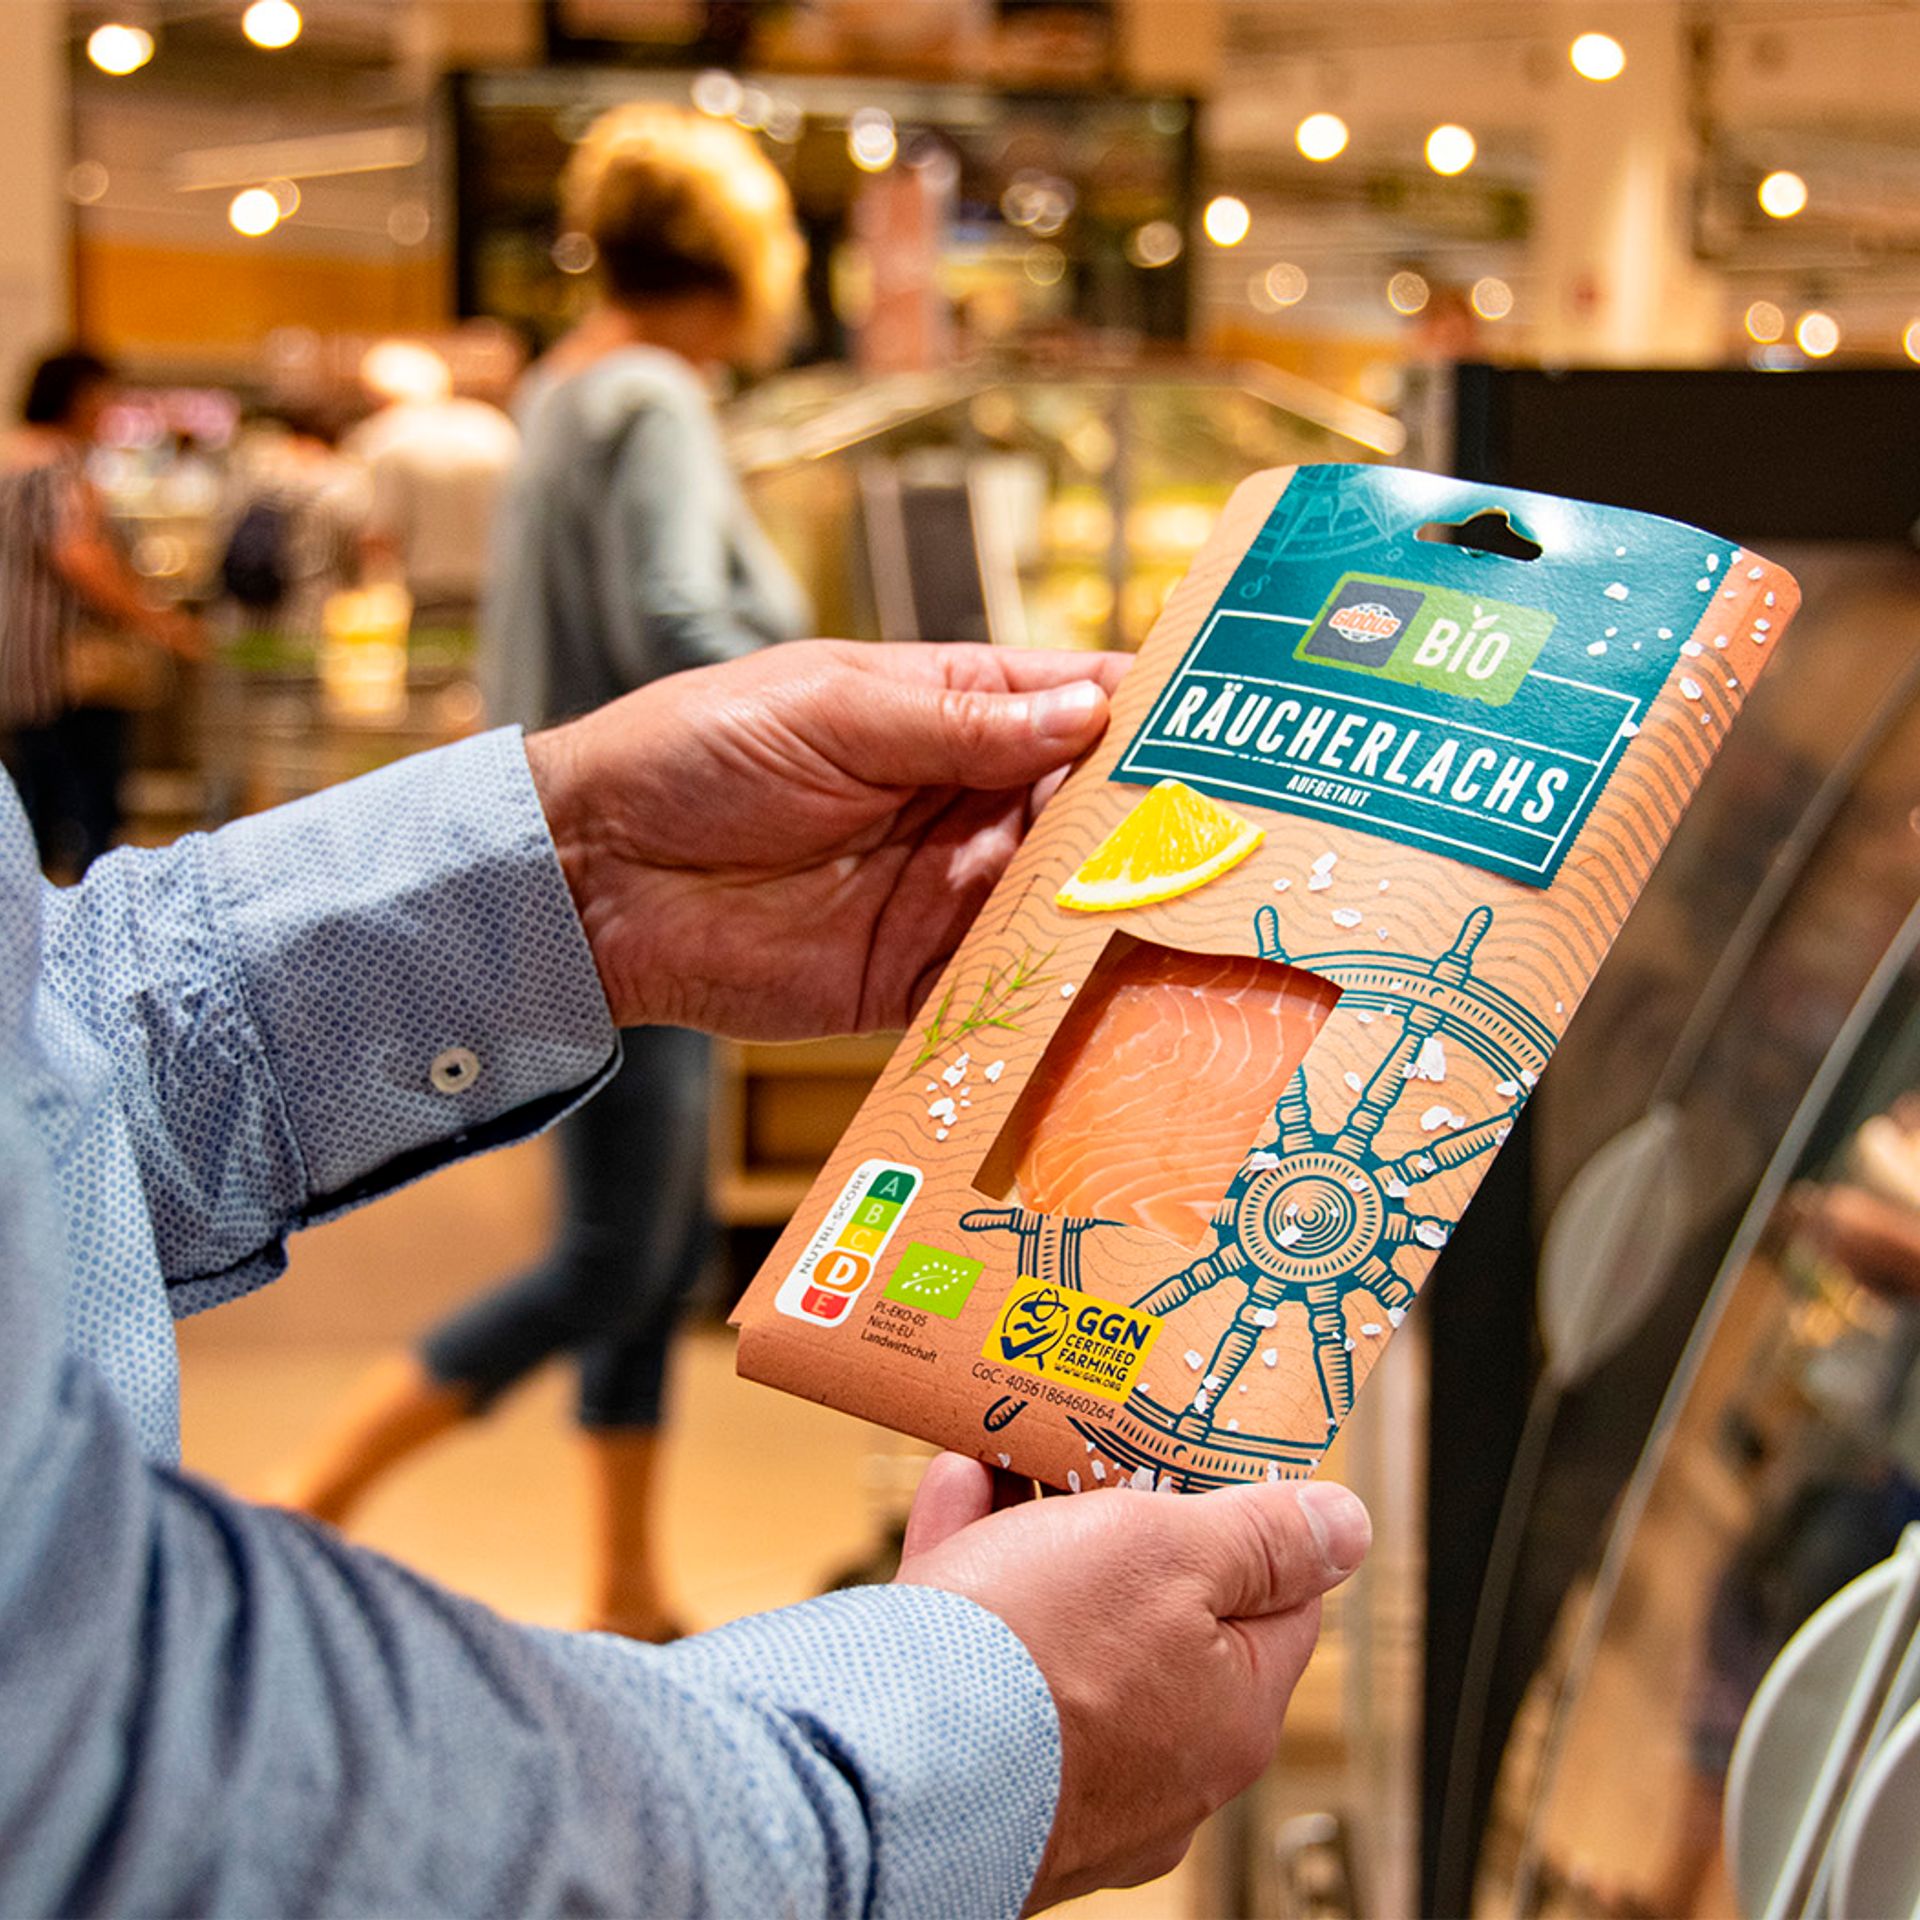 Image of a consumer holding a salmon product with the GGN label